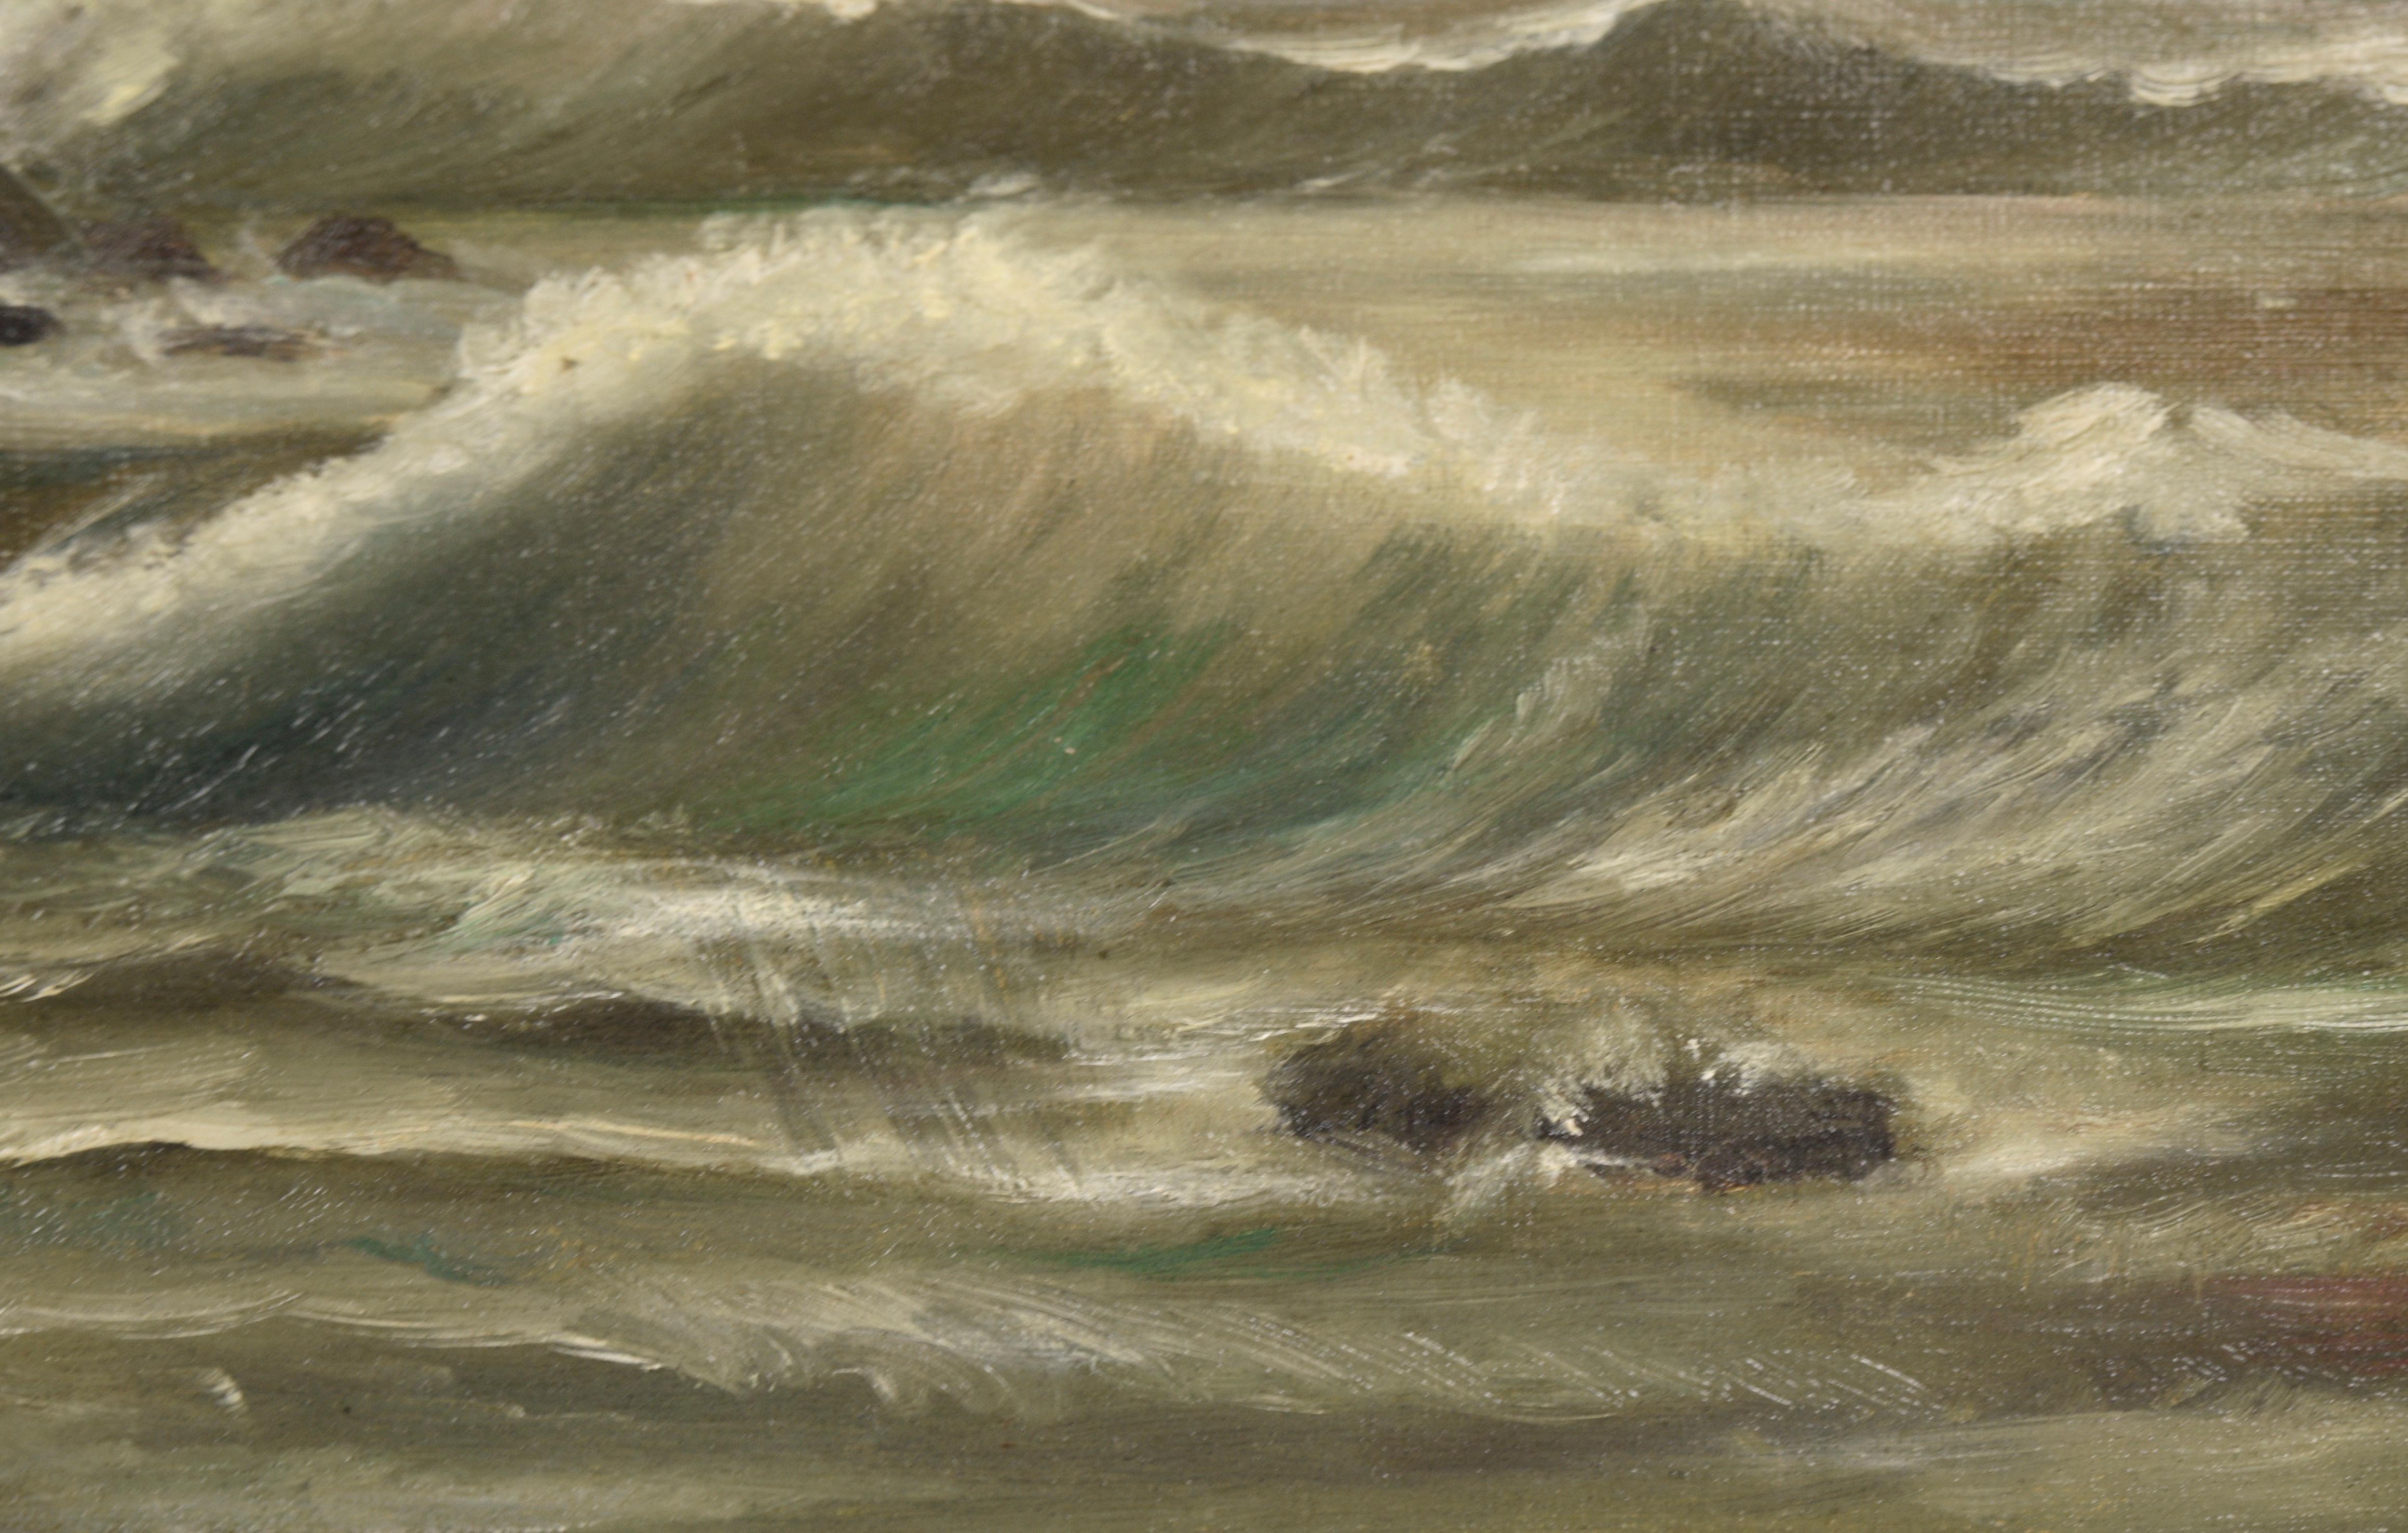 Dramatic Westcoast seascape by an unknown artist. Waves are crashing against a rocky shore, sending spray into the air. The sky above is gray with hints of pink, indicating an impending storm. circa 1910-20

Nicht signiert.
Presented in a giltwood